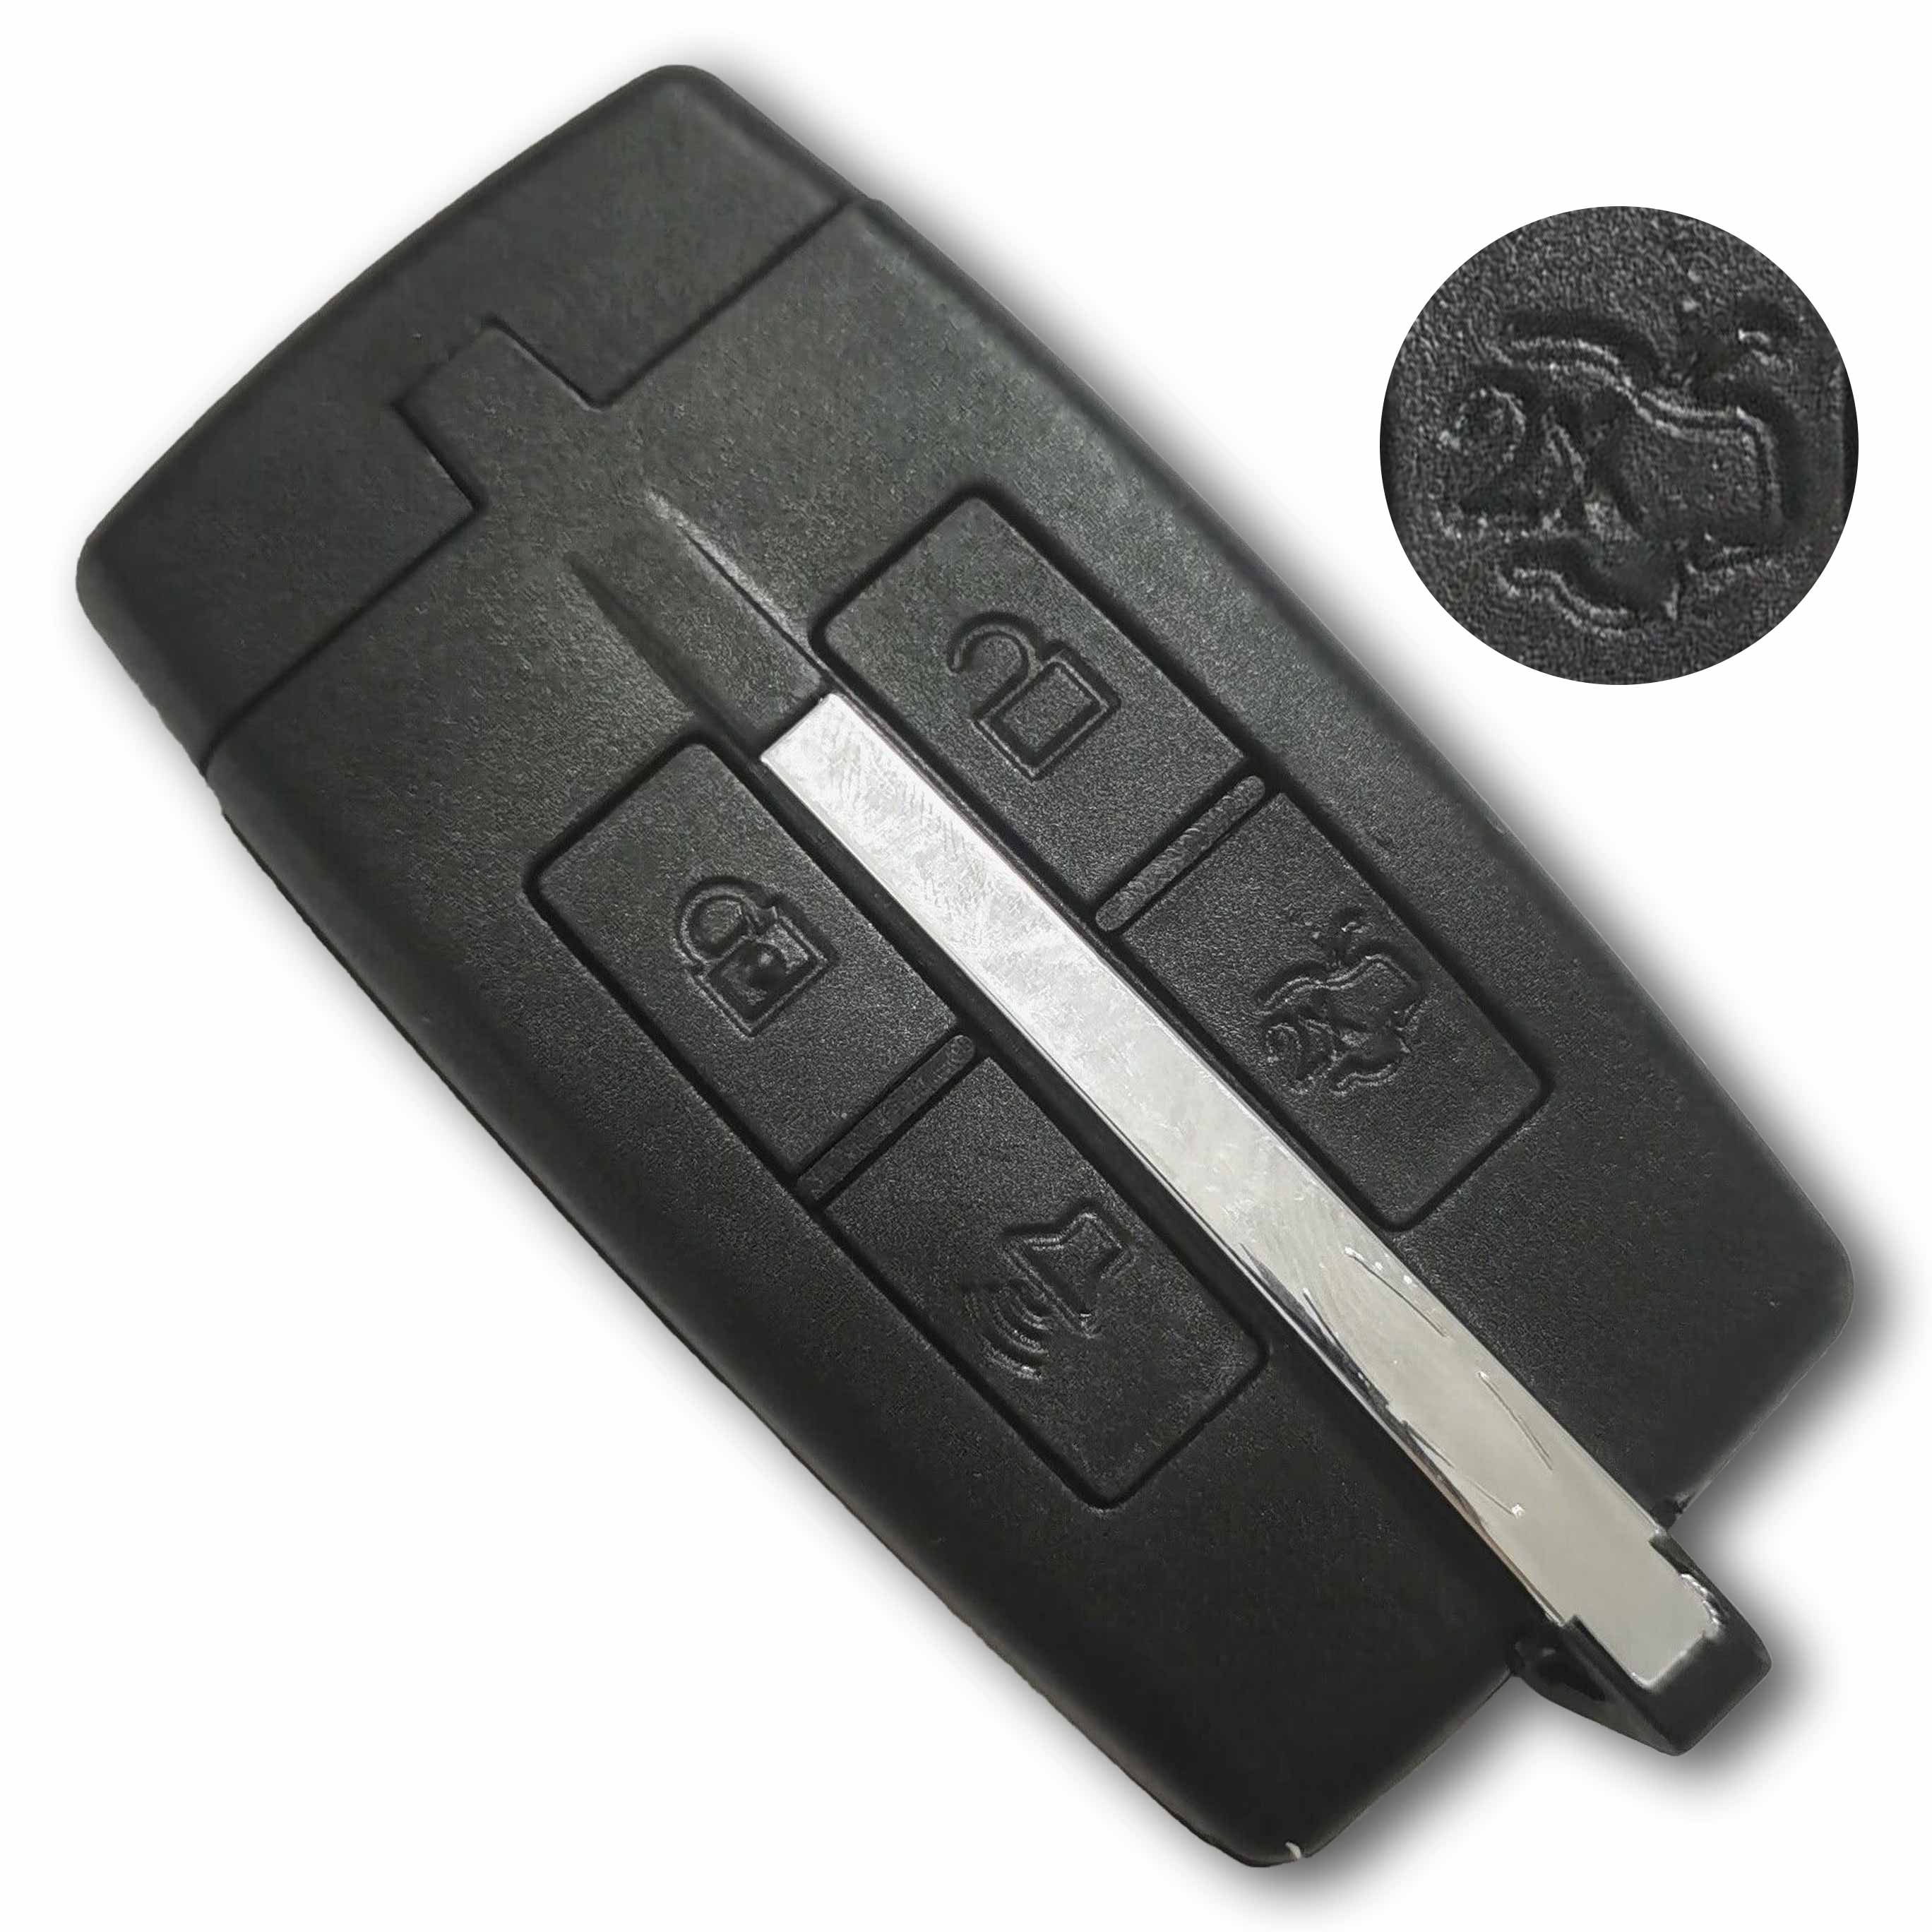 315 MHz Keyless Smart Key for 2009 ~ 2012 Lincoln MKS MKT Ford Taurus / M3N5WY8406 / 46 Chip